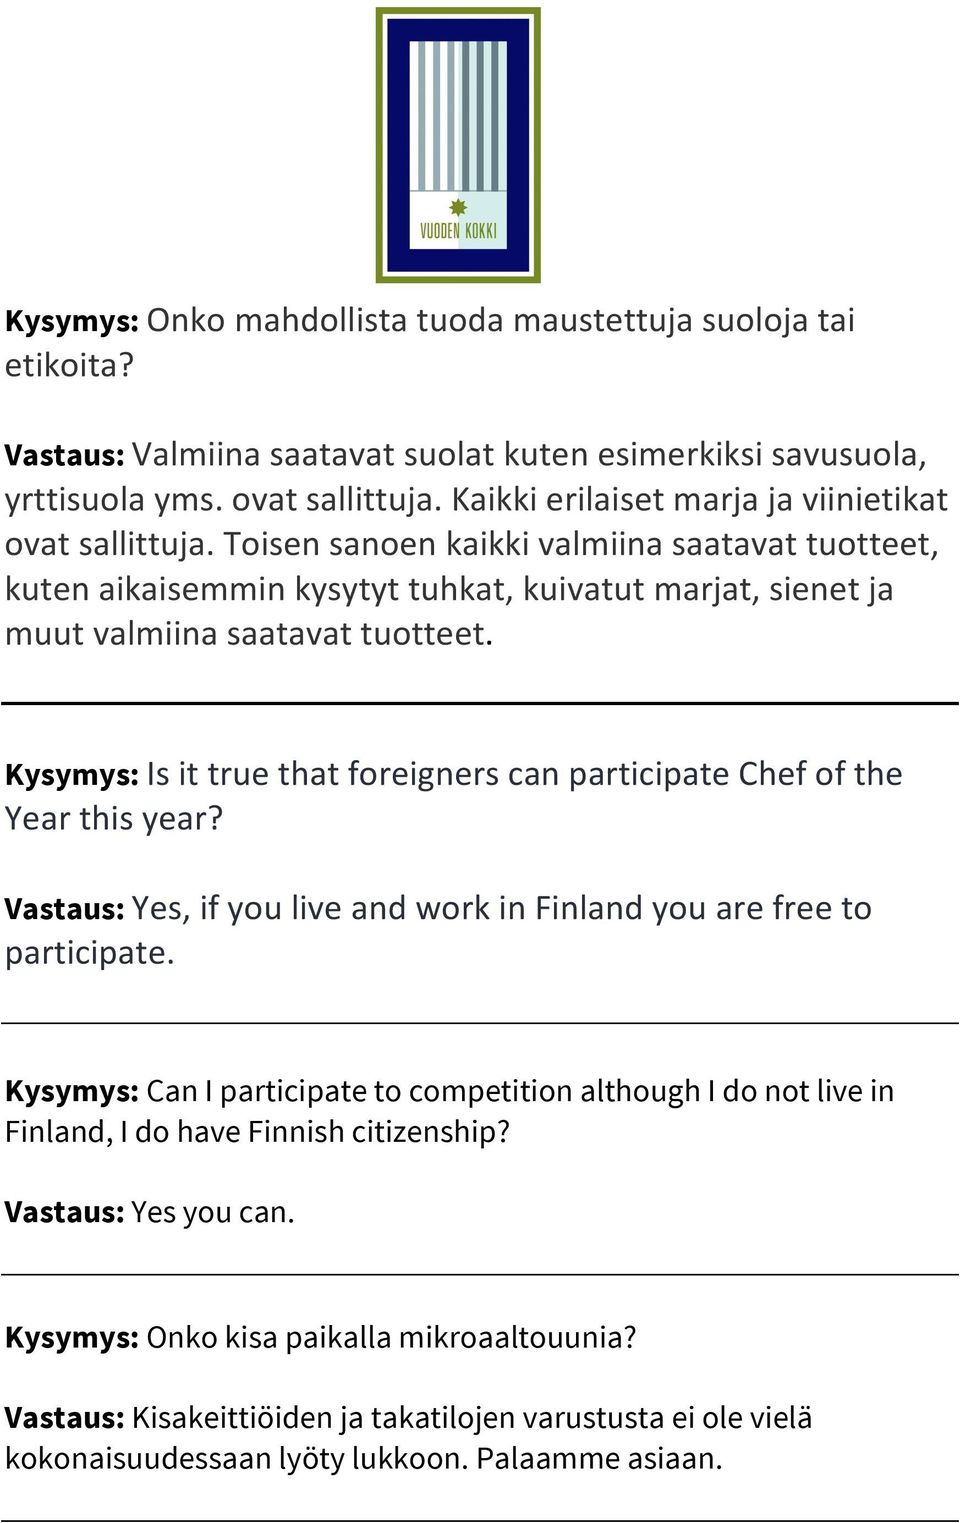 Kysymys: Is it true that foreigners can participate Chef of the Year this year? Vastaus: Yes, if you live and work in Finland you are free to participate.